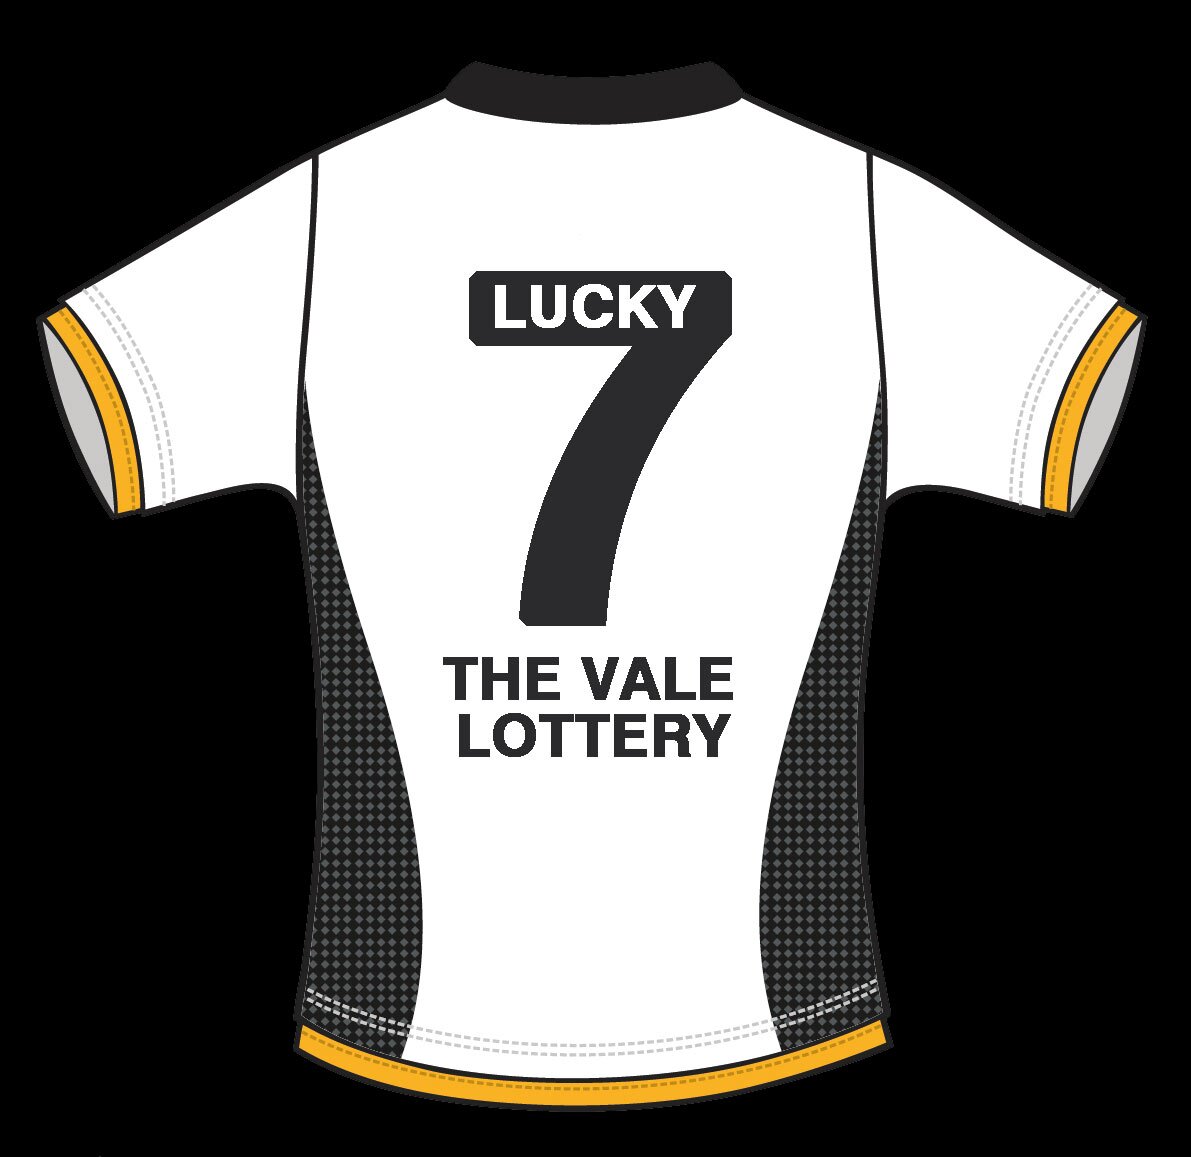 Be in it to win it. Official Twitter account of Port Vale FC's Lucky 7 Lottery